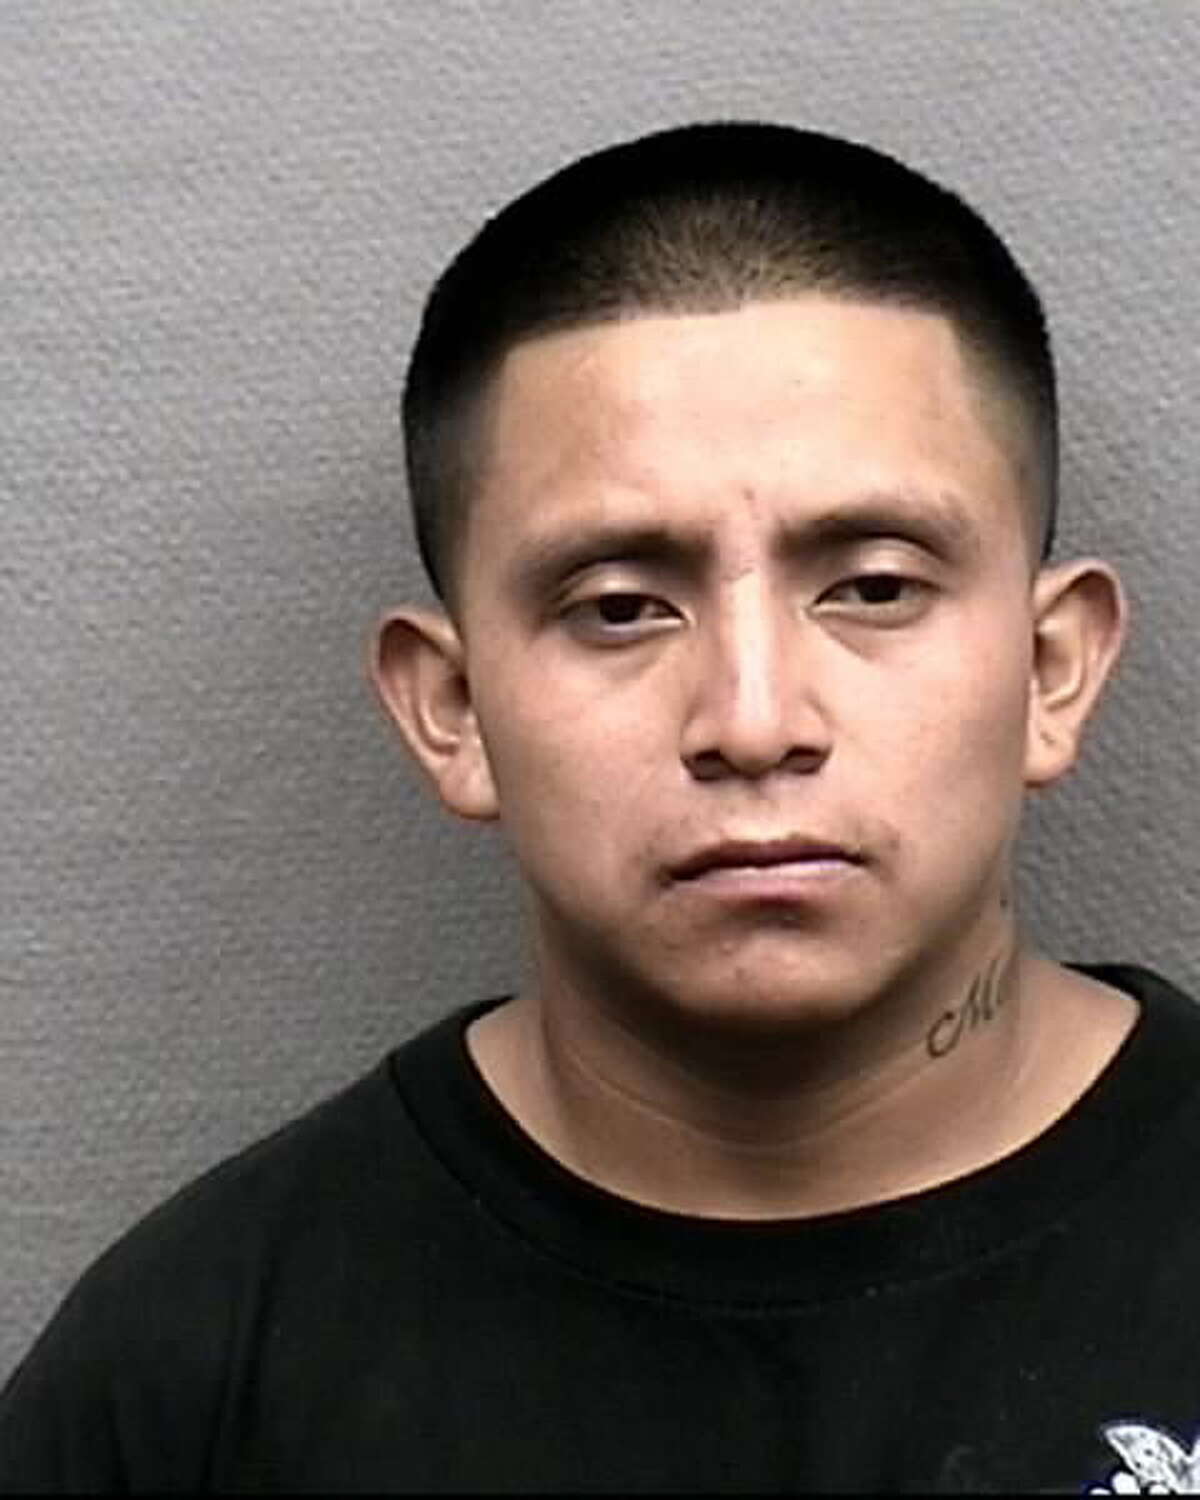 Tomas Gonzalez-Turquiz (H/m, 24) is charged with aggravated assault- serious bodily injury, aggravated assault with a deadly weapon, and assault of a family member. All cases are in the 178th State District Court. He is one of the first people arrested by the Lucky 13 unit of the HPD